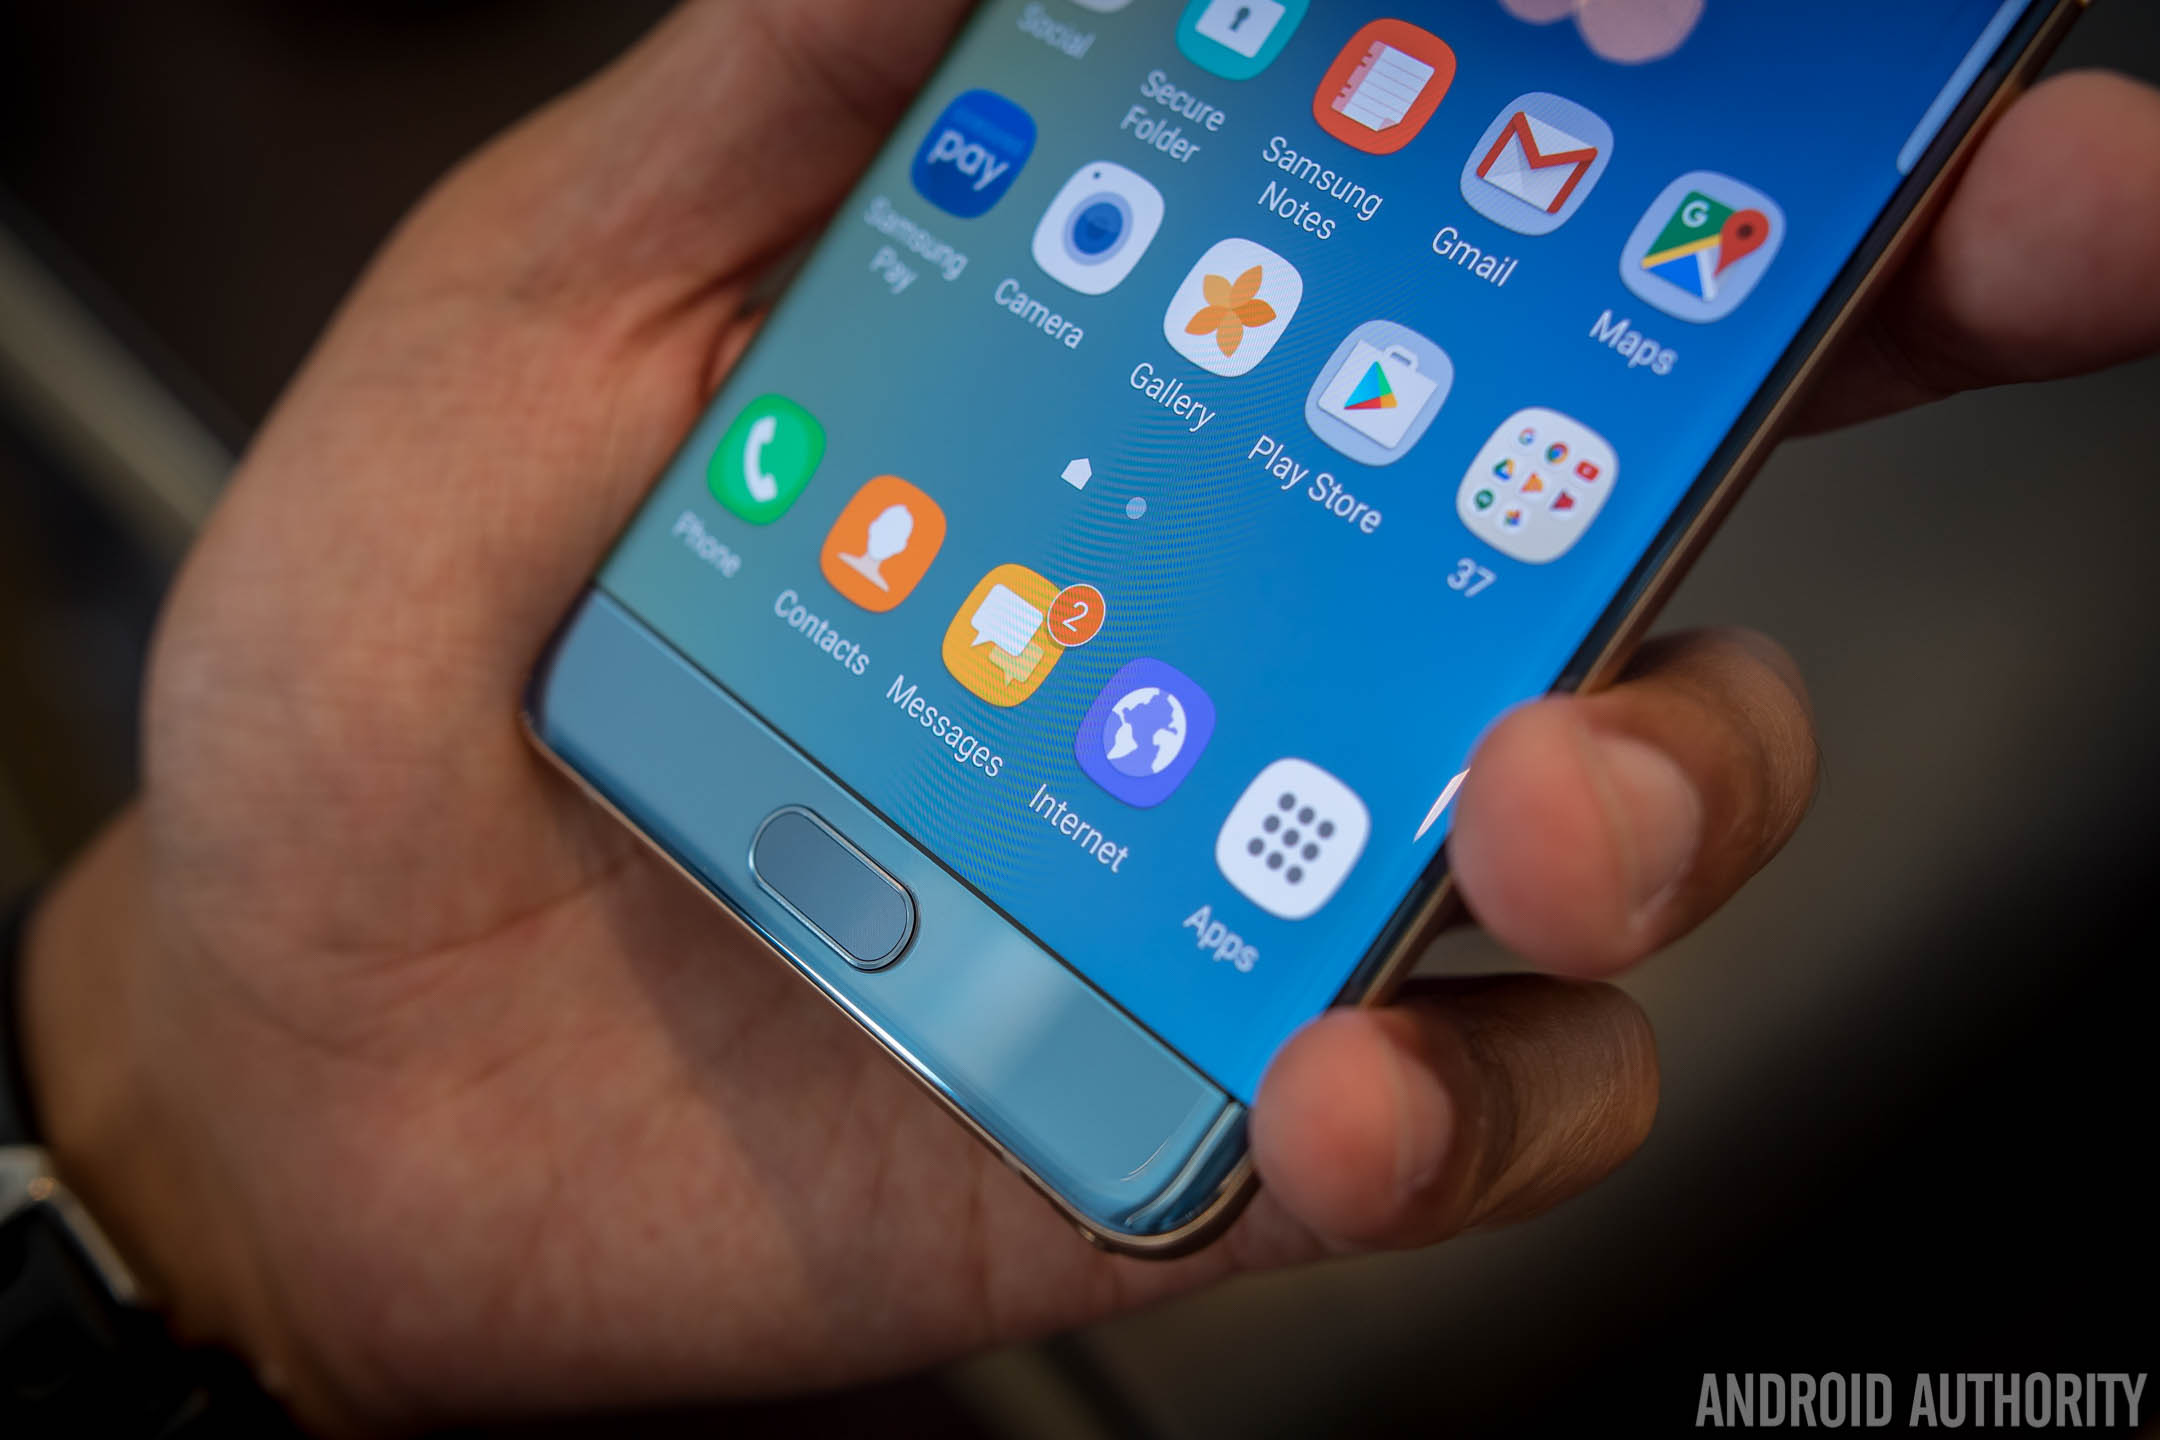 Samsung-Galaxy-Note-7-hands-on-first-batch-AA-(32-of-47)